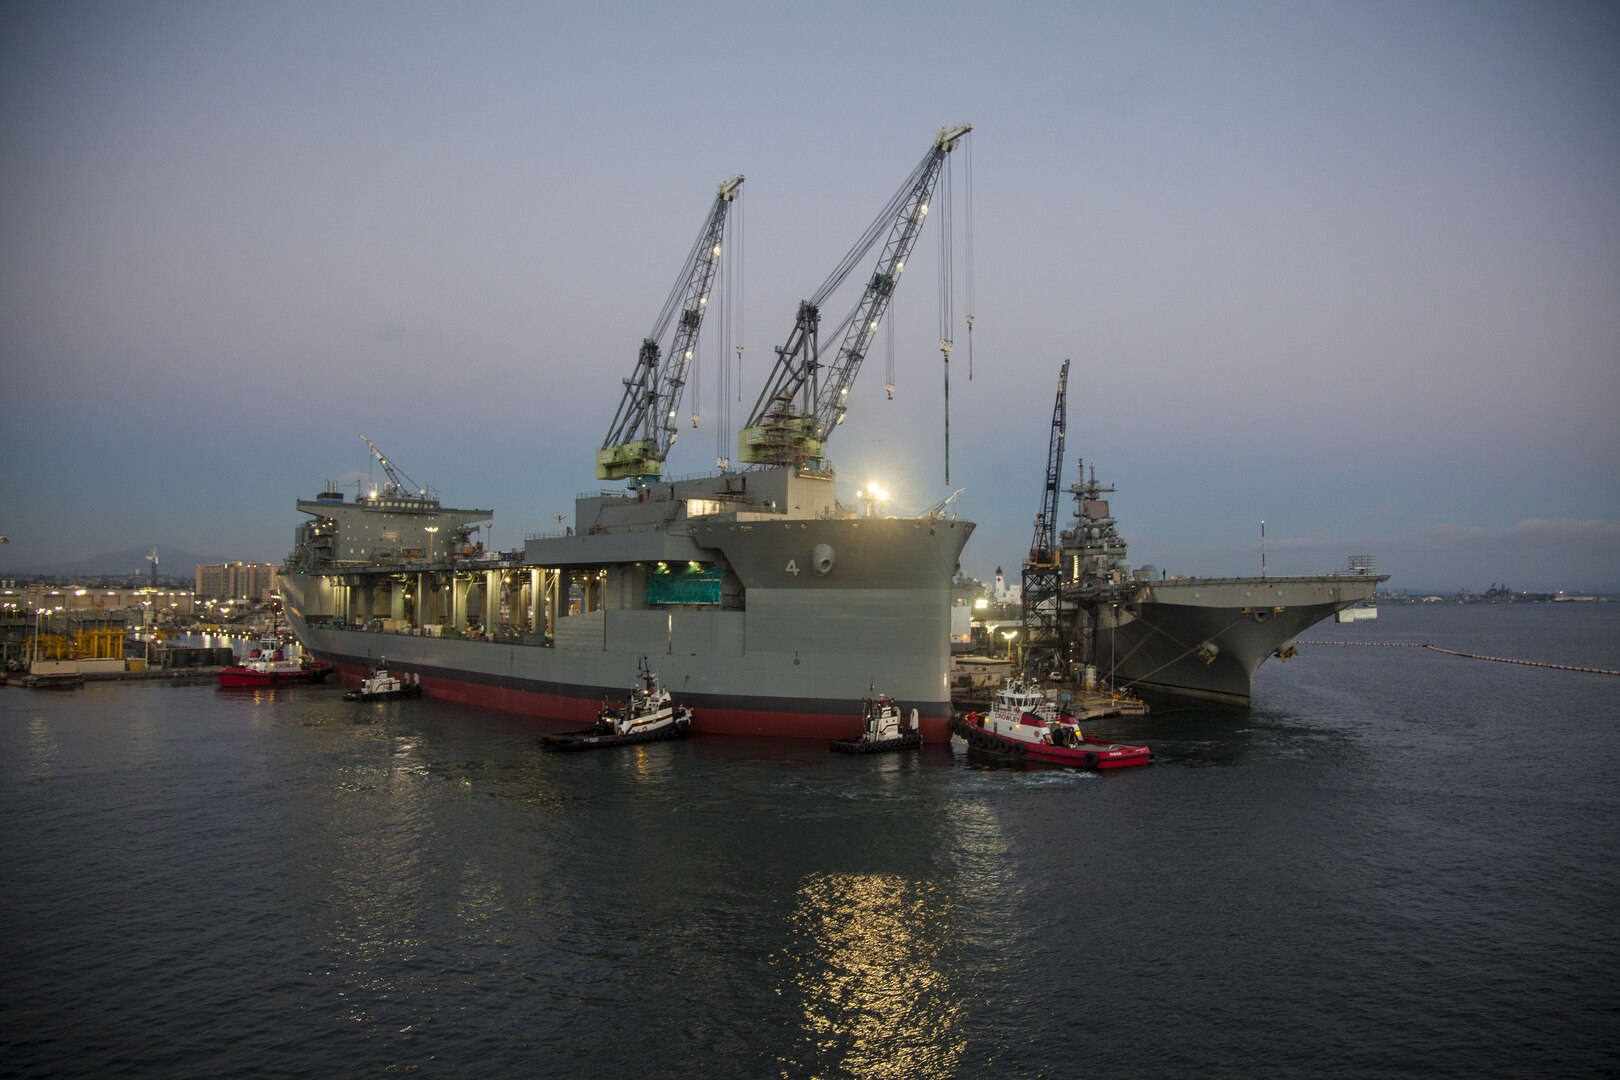 USNS Hershel ‘Woody’ Williams (ESB 4) is preparing to be floated out and launched at the General Dynamics NASSCO shipyard, Aug. 19. In the background, USS Boxer (LHD 4) is undergoing maintenance and modernization. (Courtesy photo by General Dynamics NASSCO)